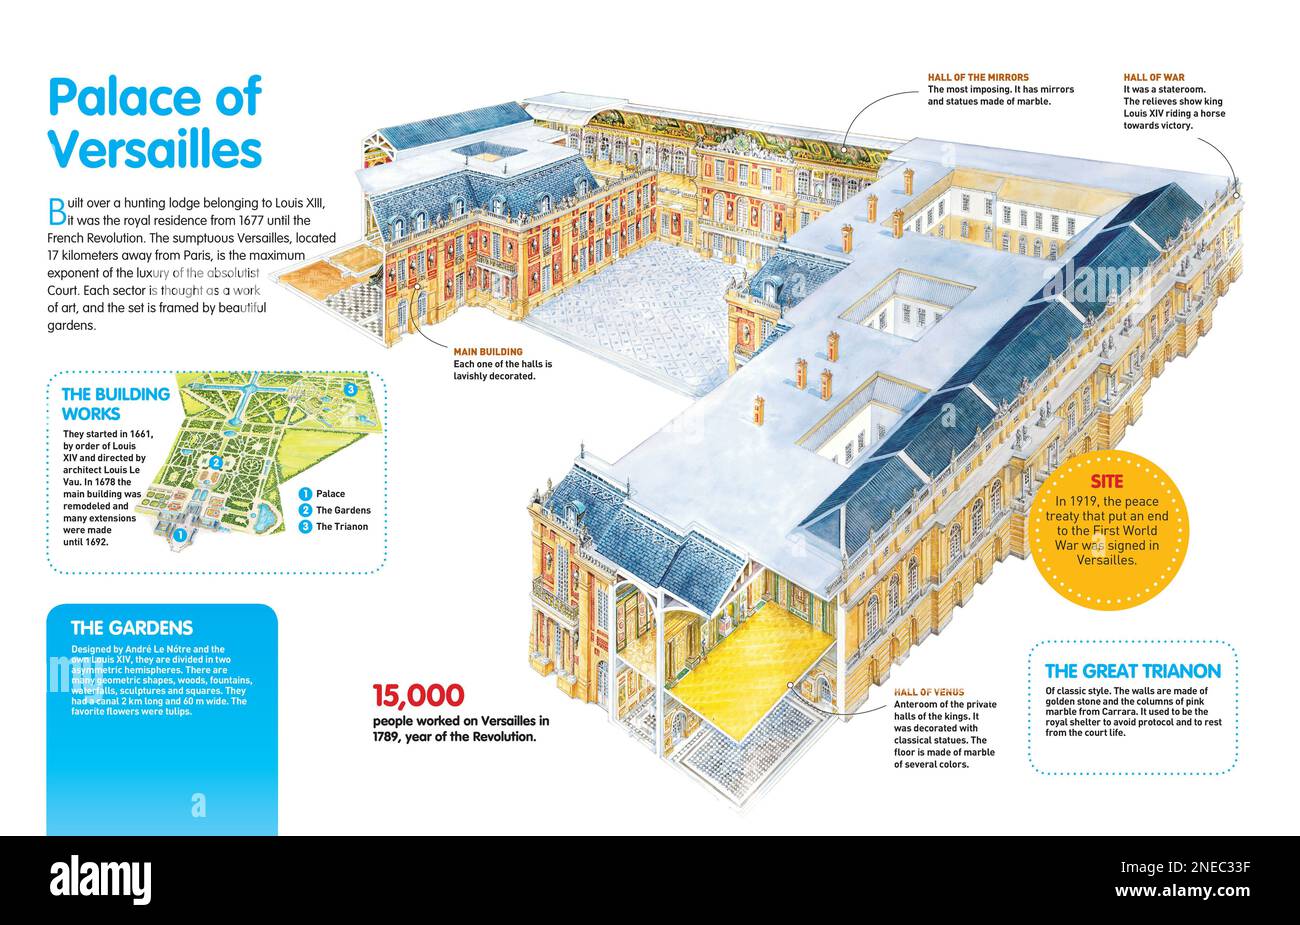 Infographic about the Palace of Versailles (Paris), where Louis XIV lived (from 1677 until the French Revolution), its gardens and halls. [QuarkXPress (.qxp); Adobe InDesign (.indd); 4960x3188]. Stock Photo